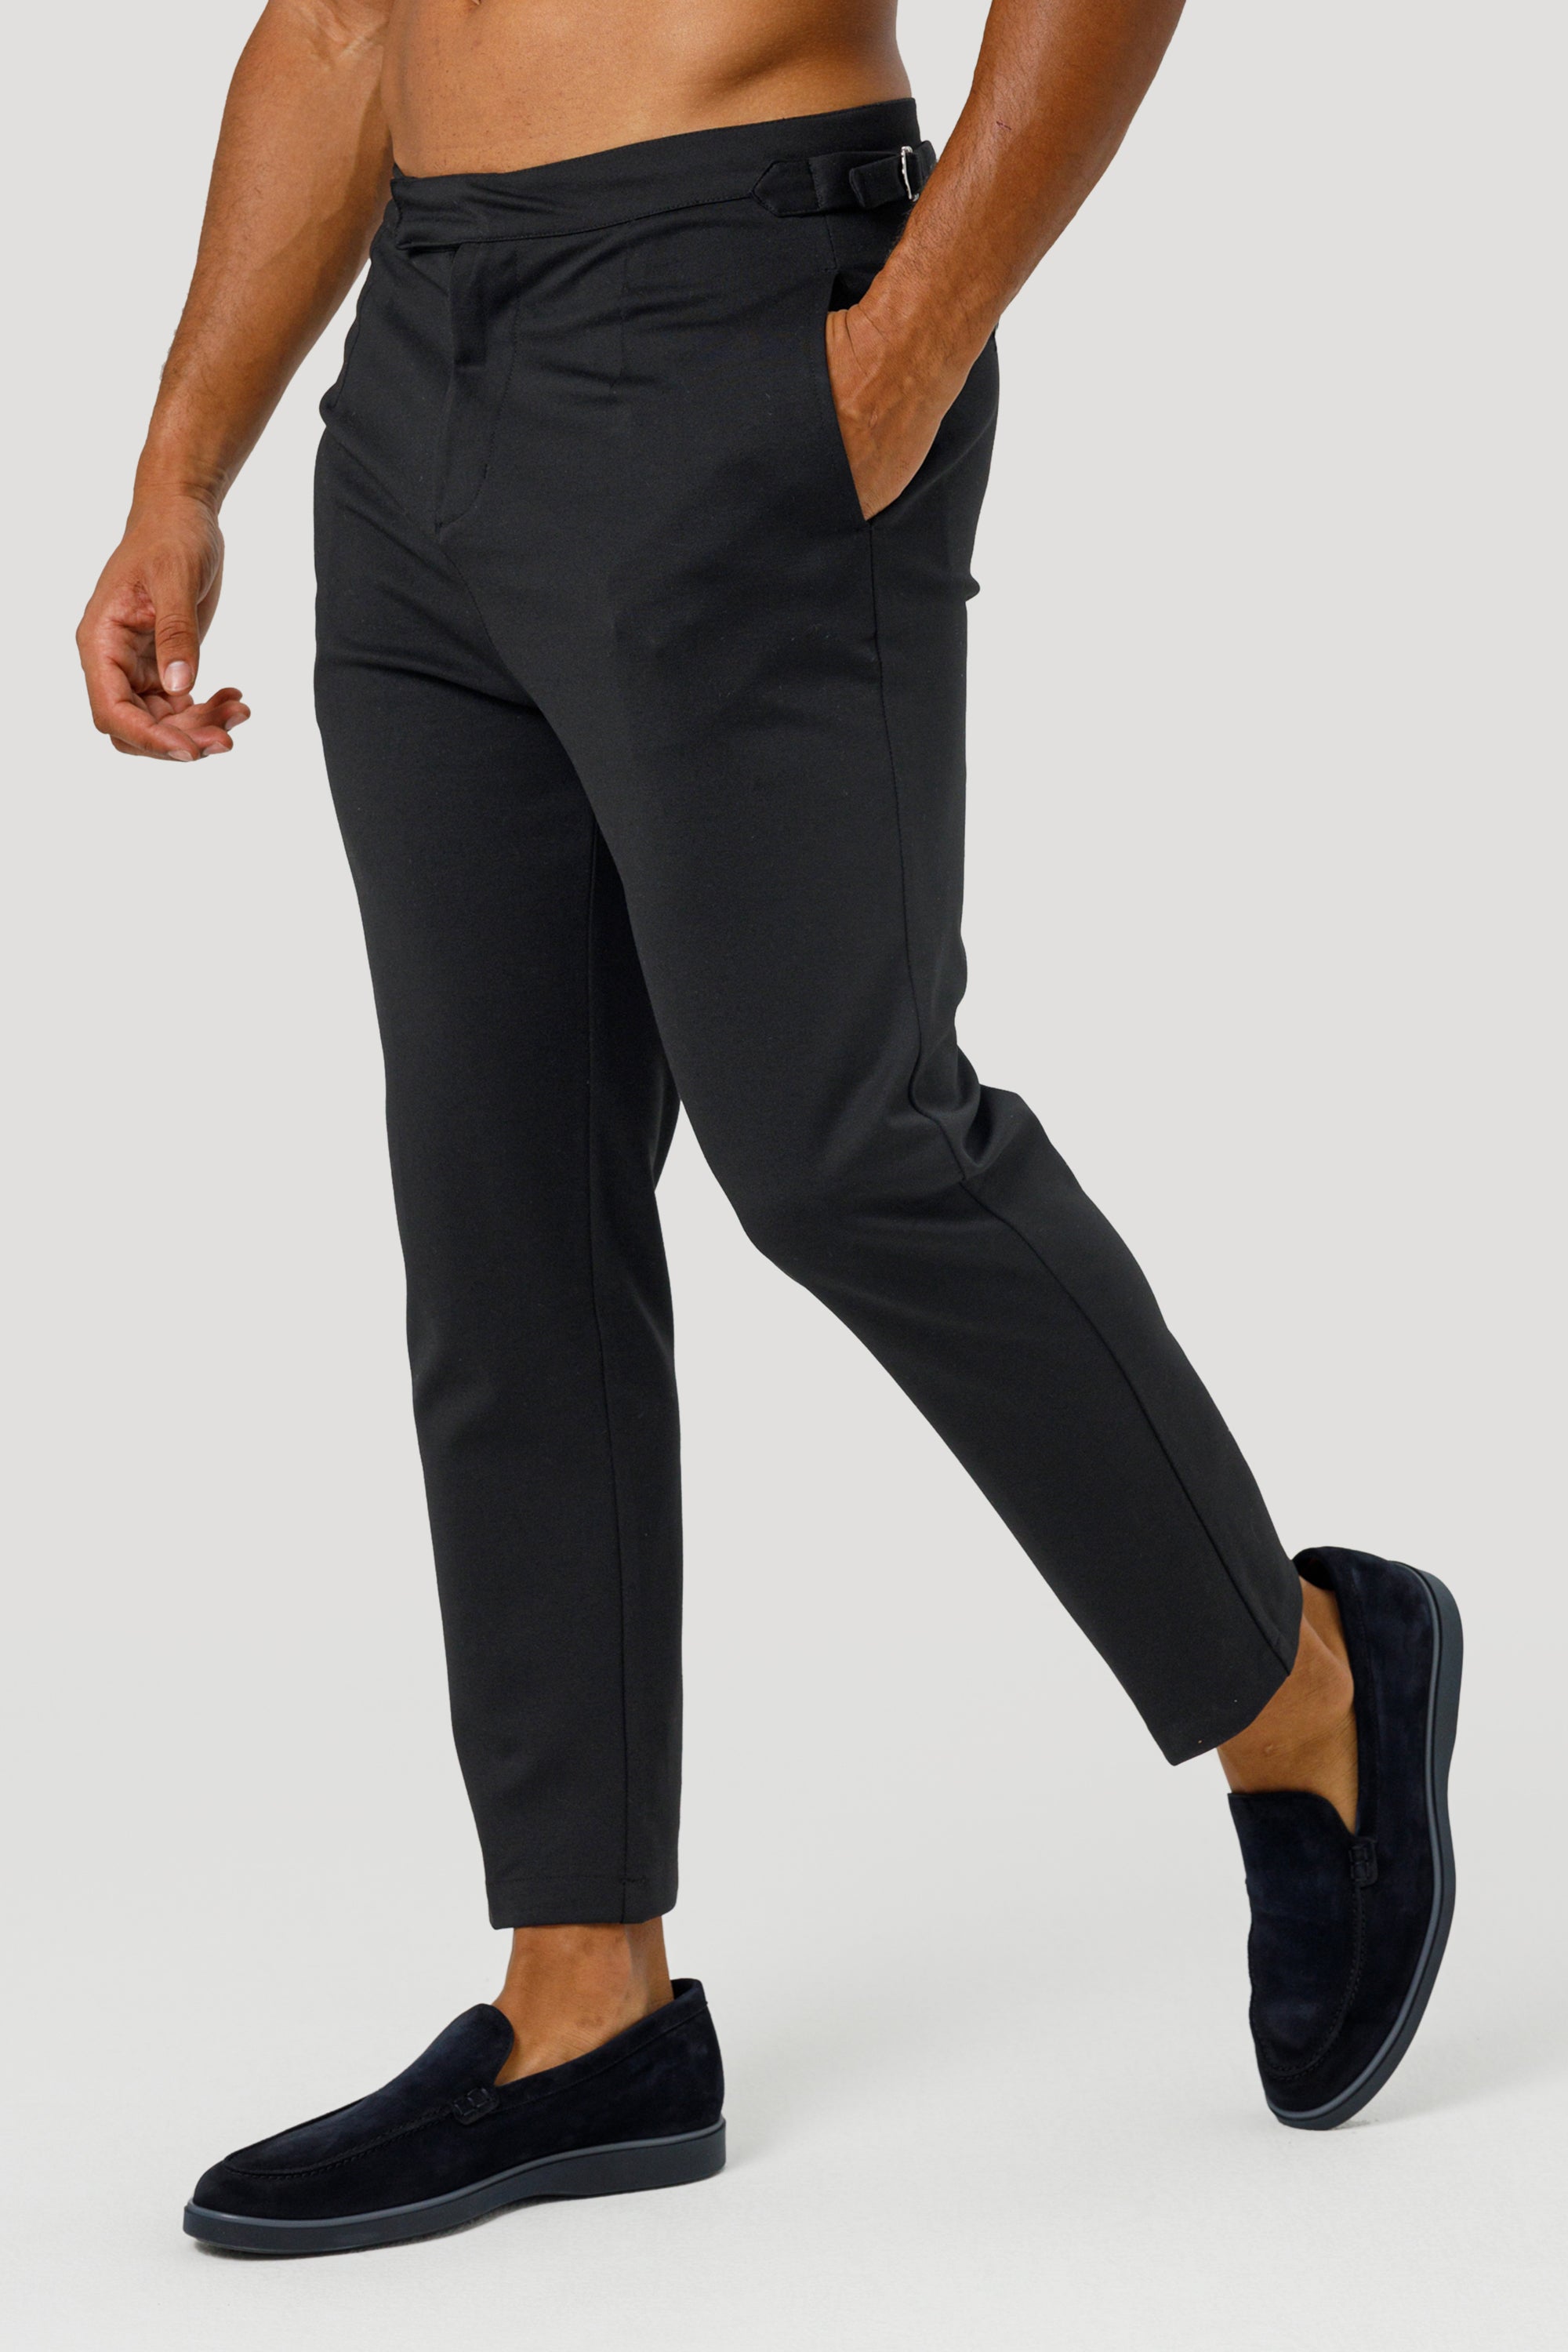 THE ALESSIO TROUSERS - BLACK